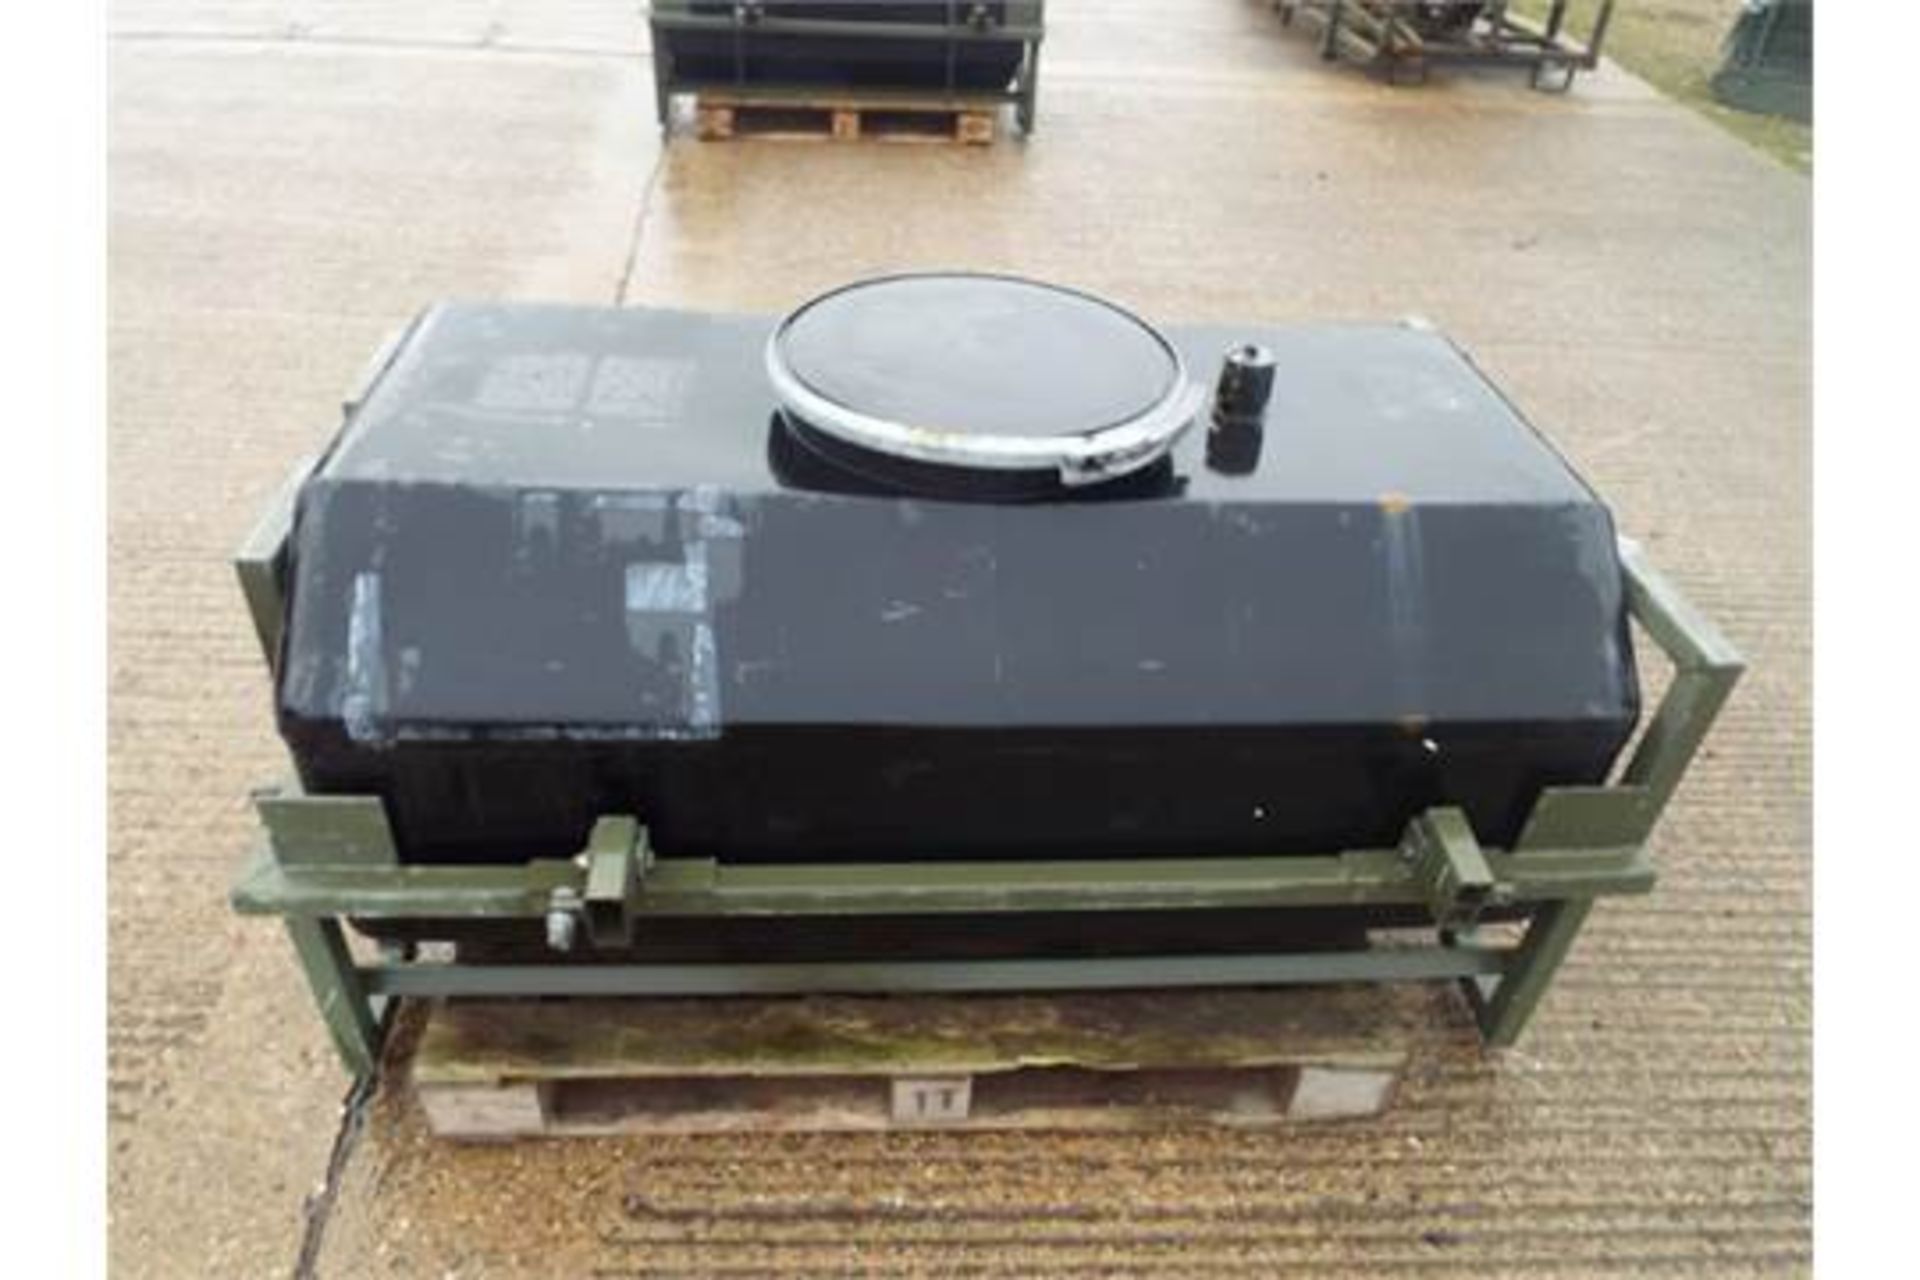 Trailer Mountable 100 Gallon Water Tank with Frame - Image 3 of 6